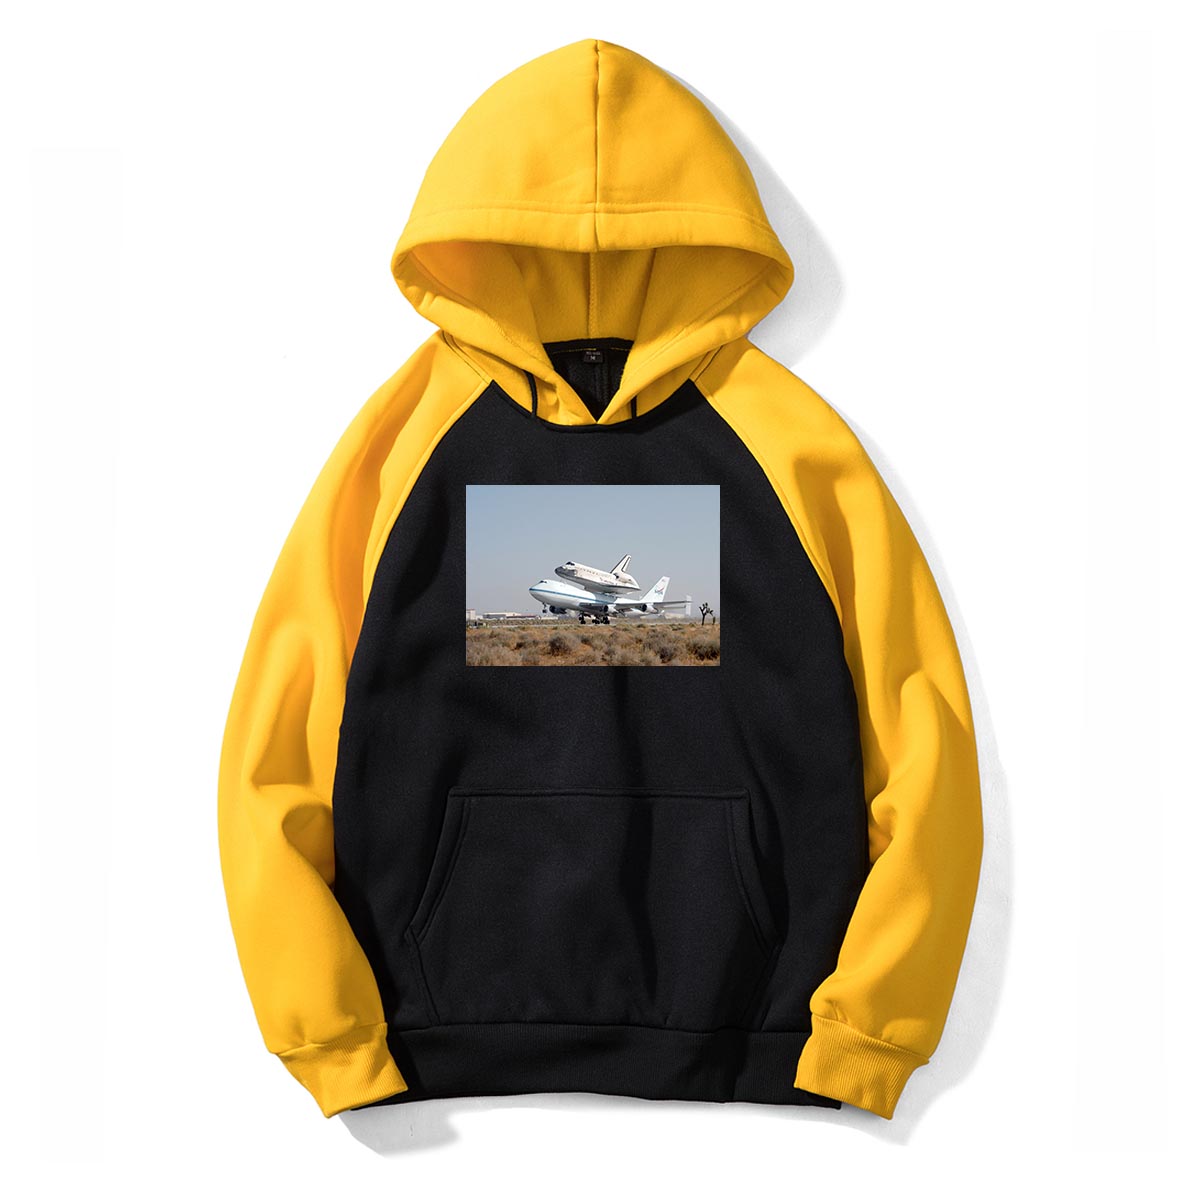 Boeing 747 Carrying Nasa's Space Shuttle Designed Colourful Hoodies